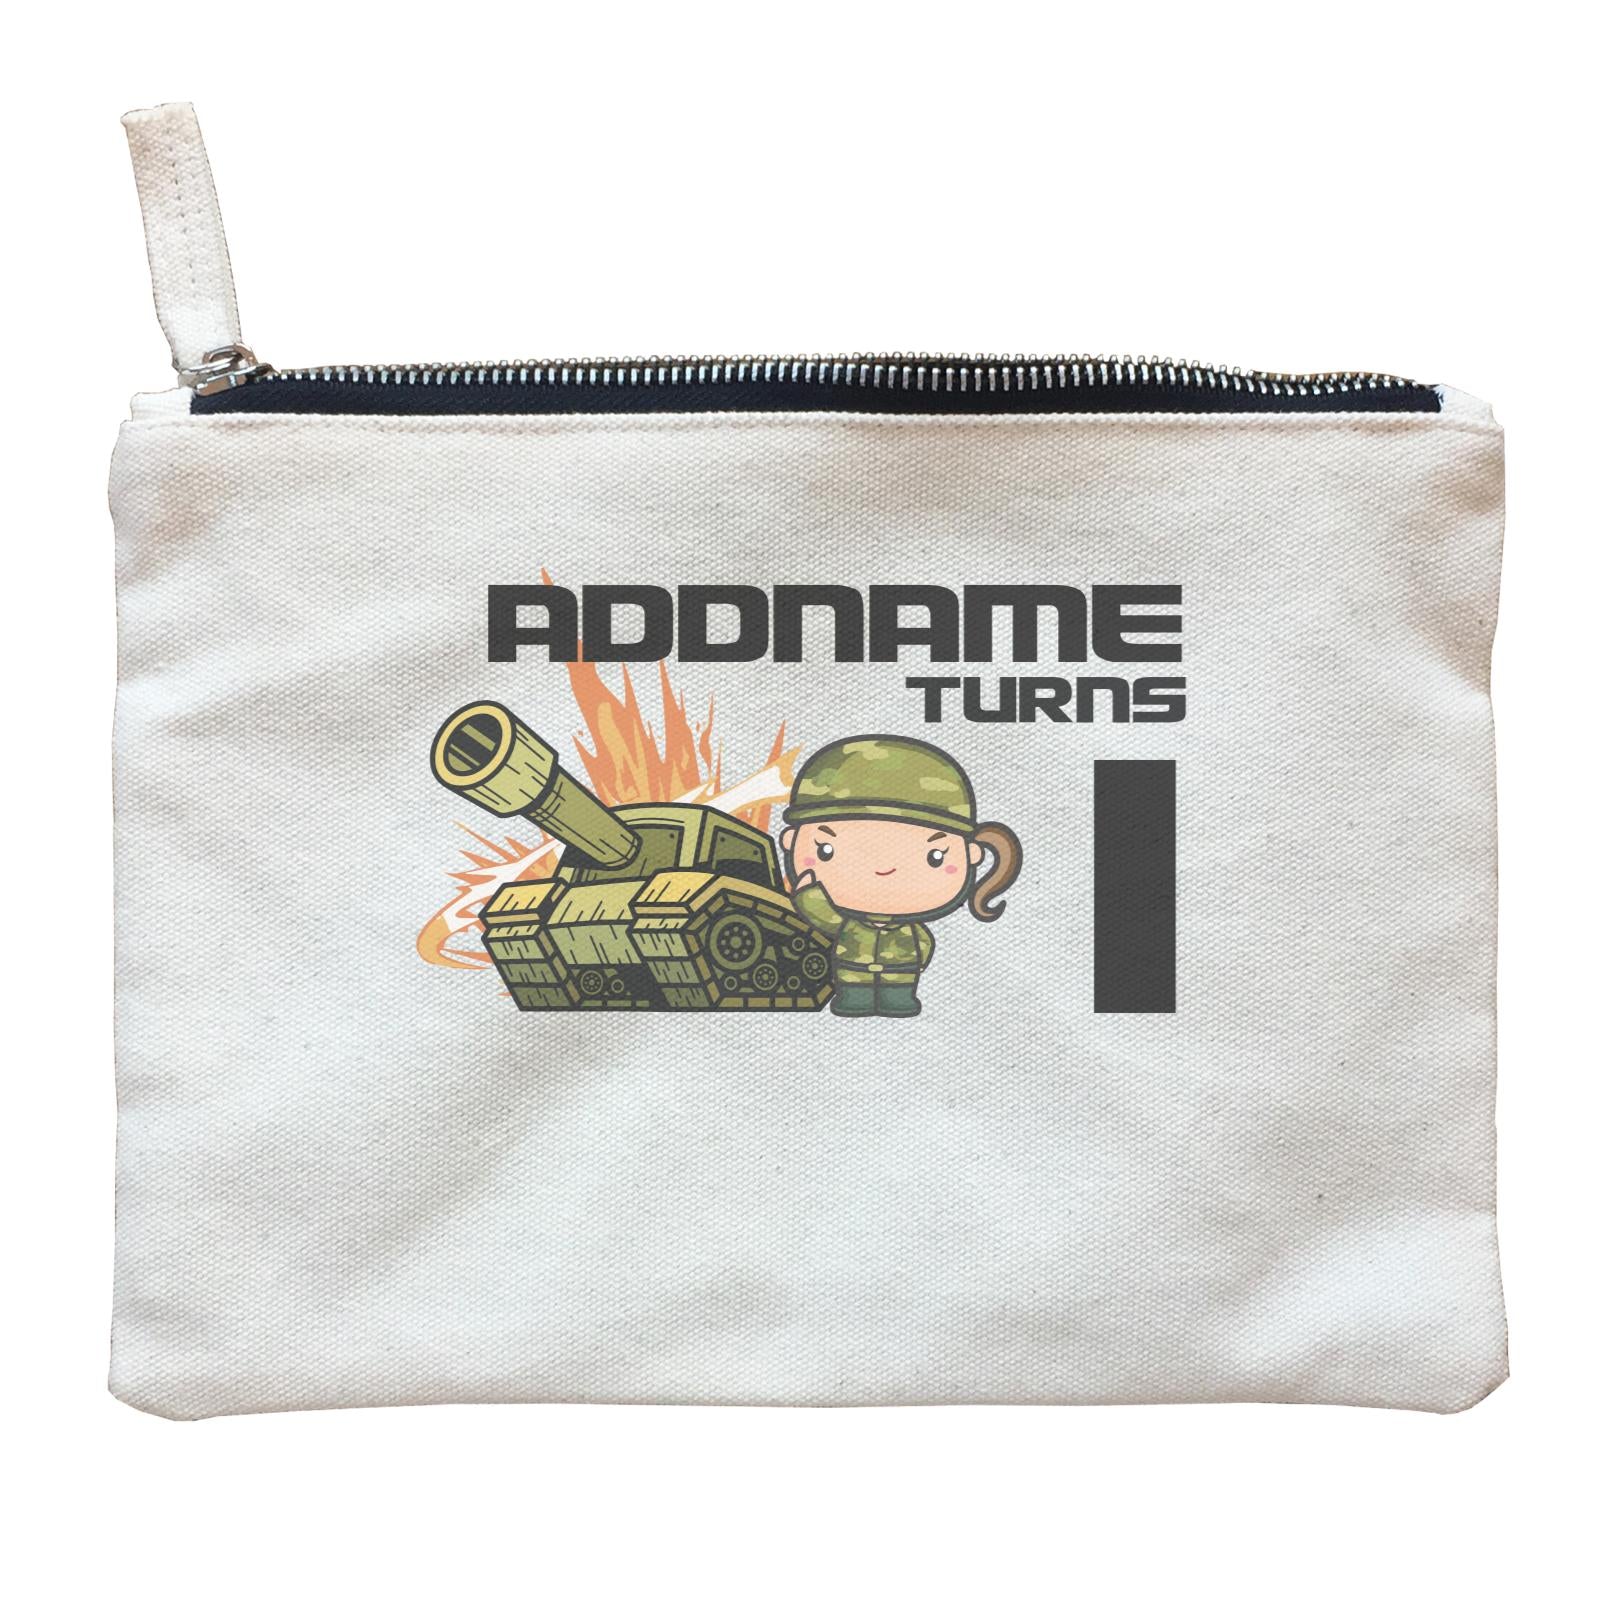 Birthday Battle Theme Tank And Army Soldier Girl Addname Turns 1 Zipper Pouch